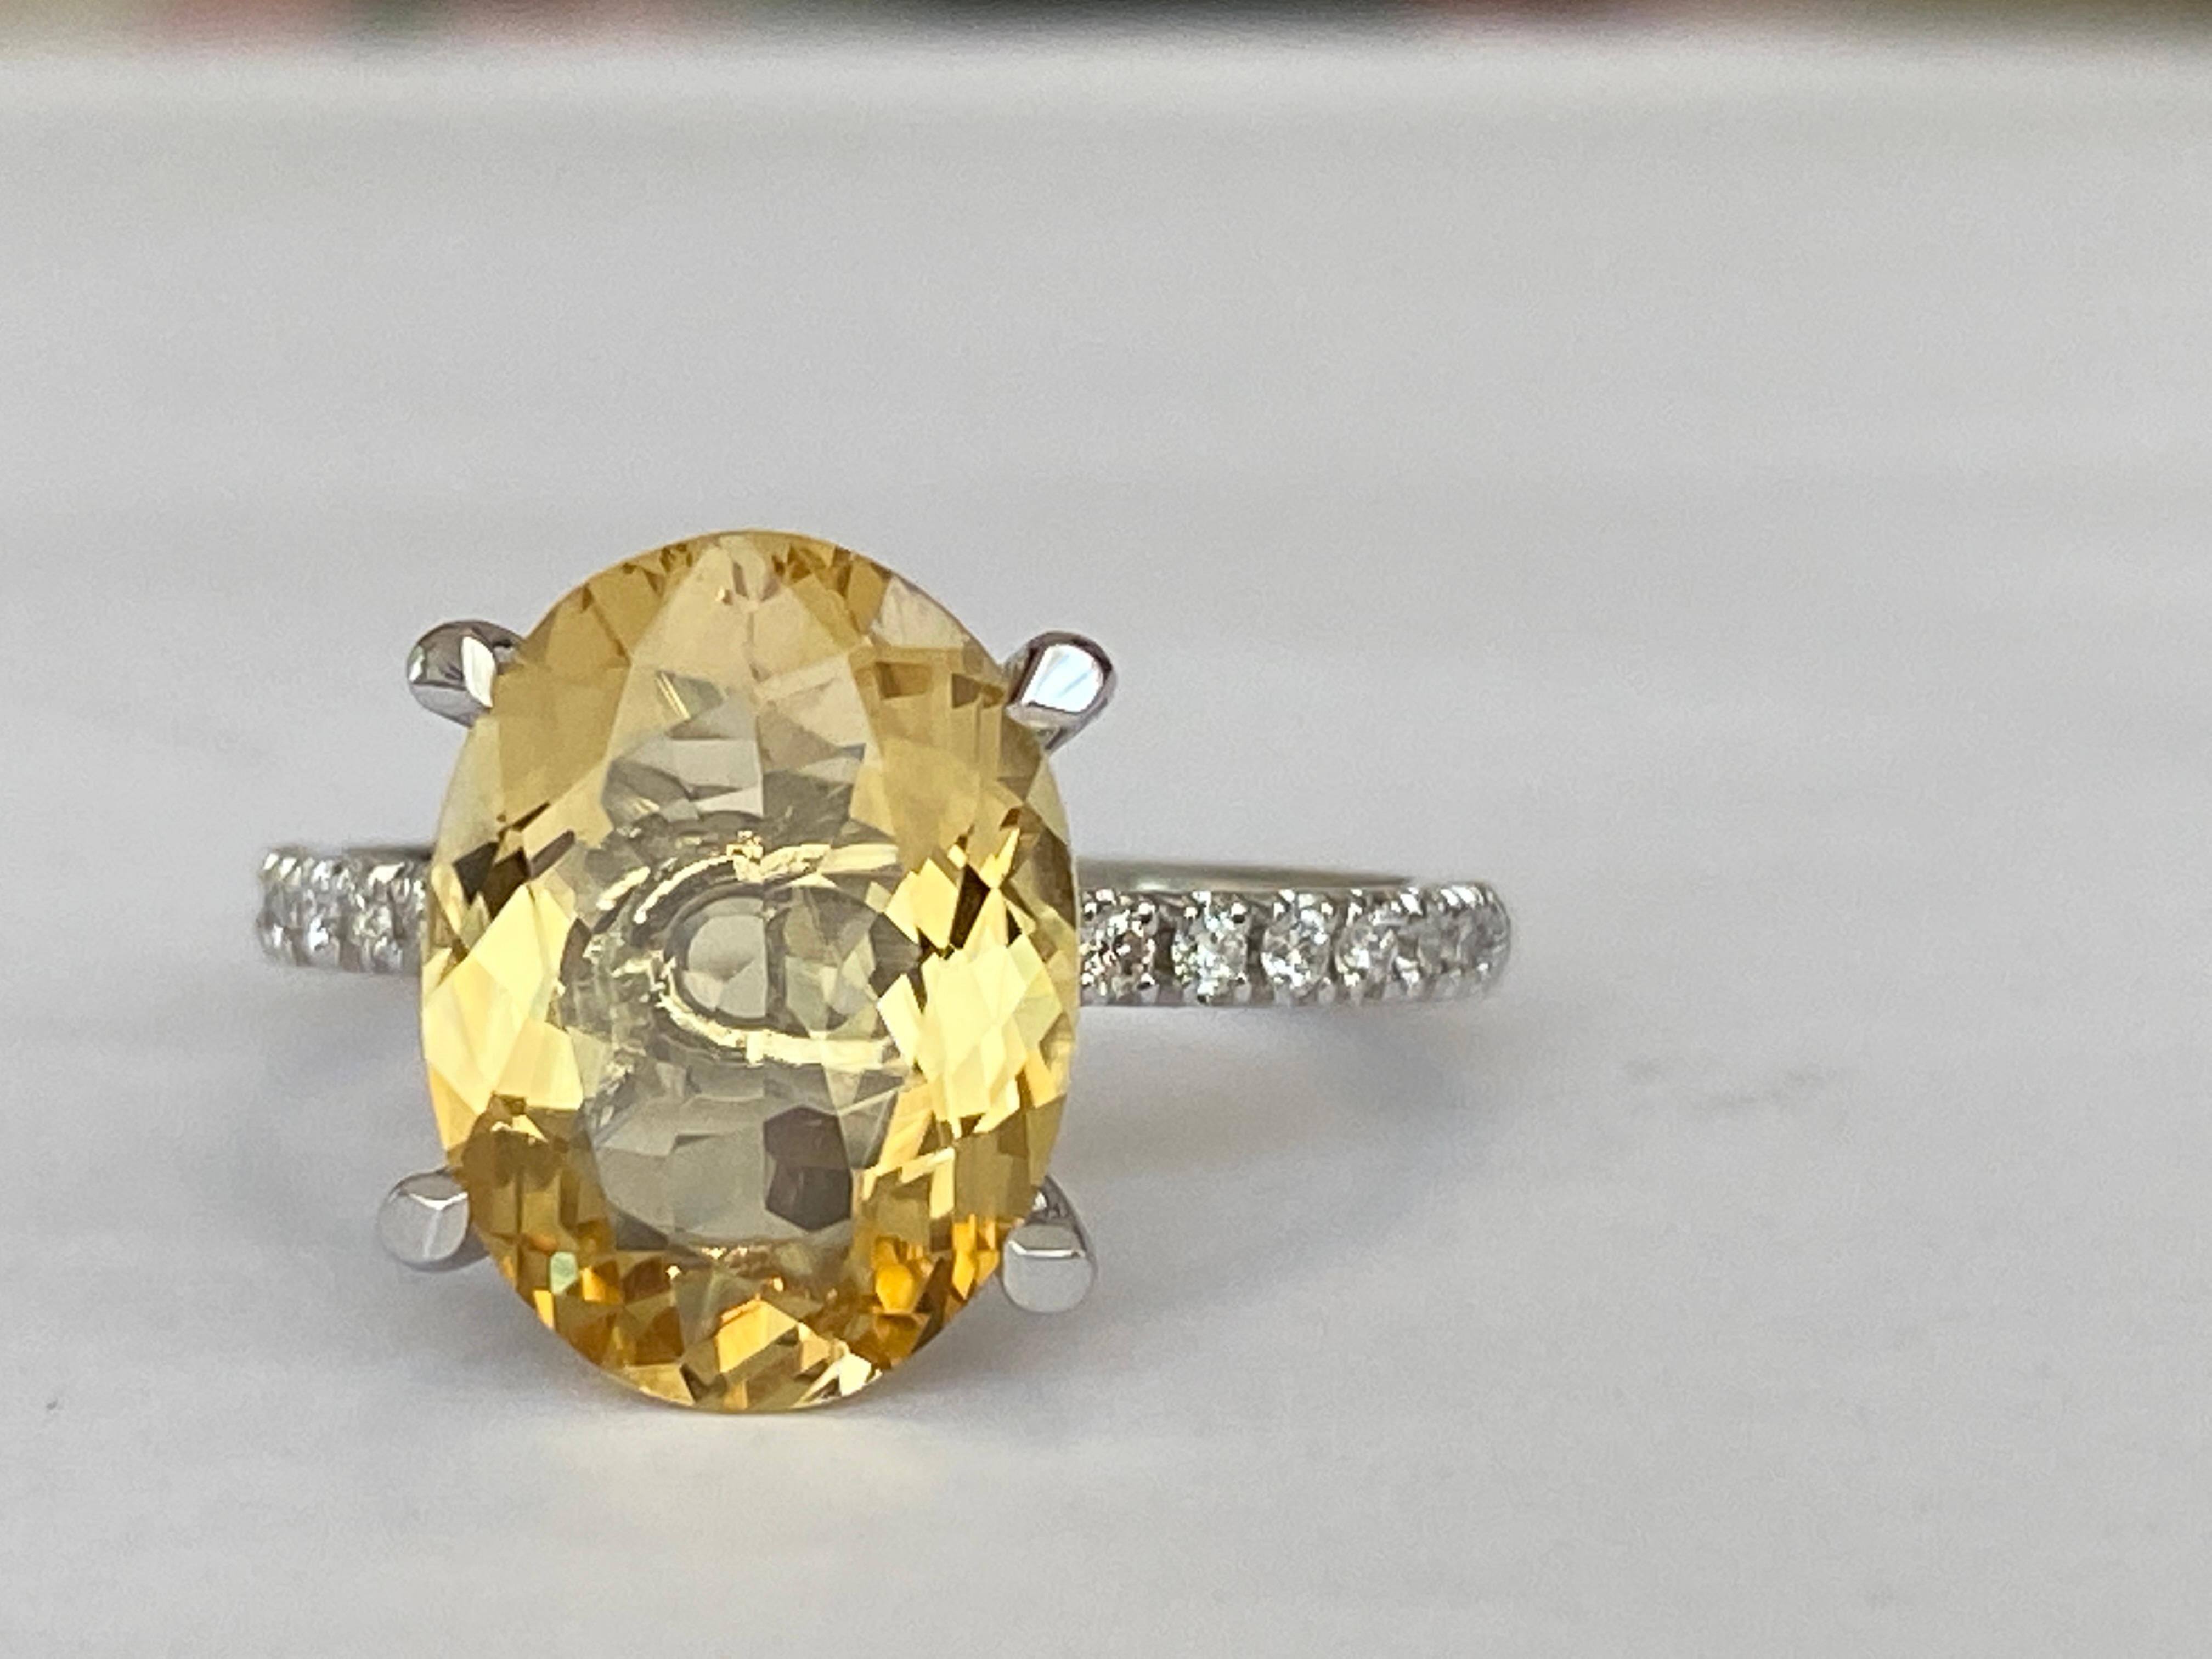 Offered beautiful ring in white gold, with a beautiful oval cut yellow beryl 3.53 ct. The ring is decorated with 16 pieces of brilliant cut diamonds, 0.20 ct in total, of quality G/VS/SI.
Gold content: 18 KT (hallmarked)
Natural yellow beryl: 3.53